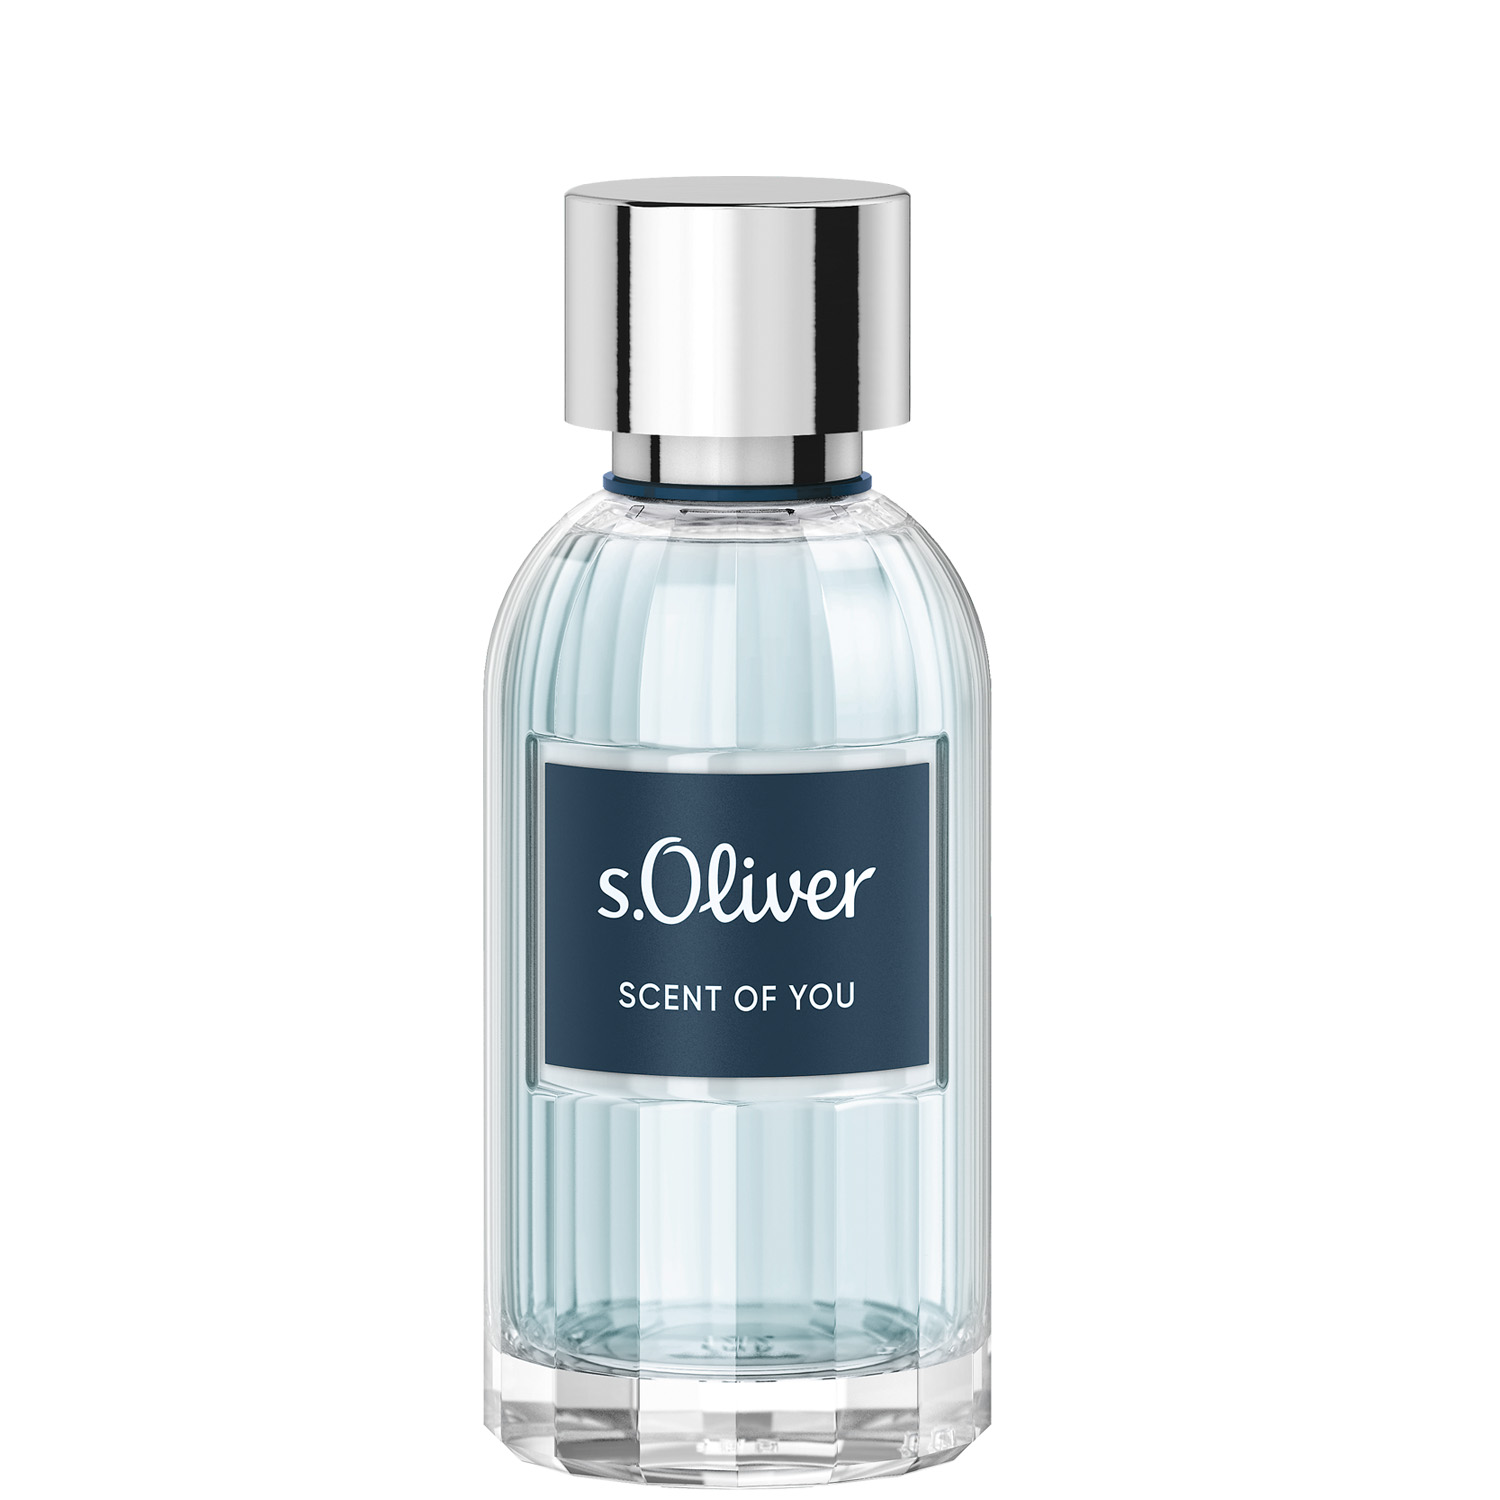 S.Oliver Scent of You Men After Shave Lotion 50ml